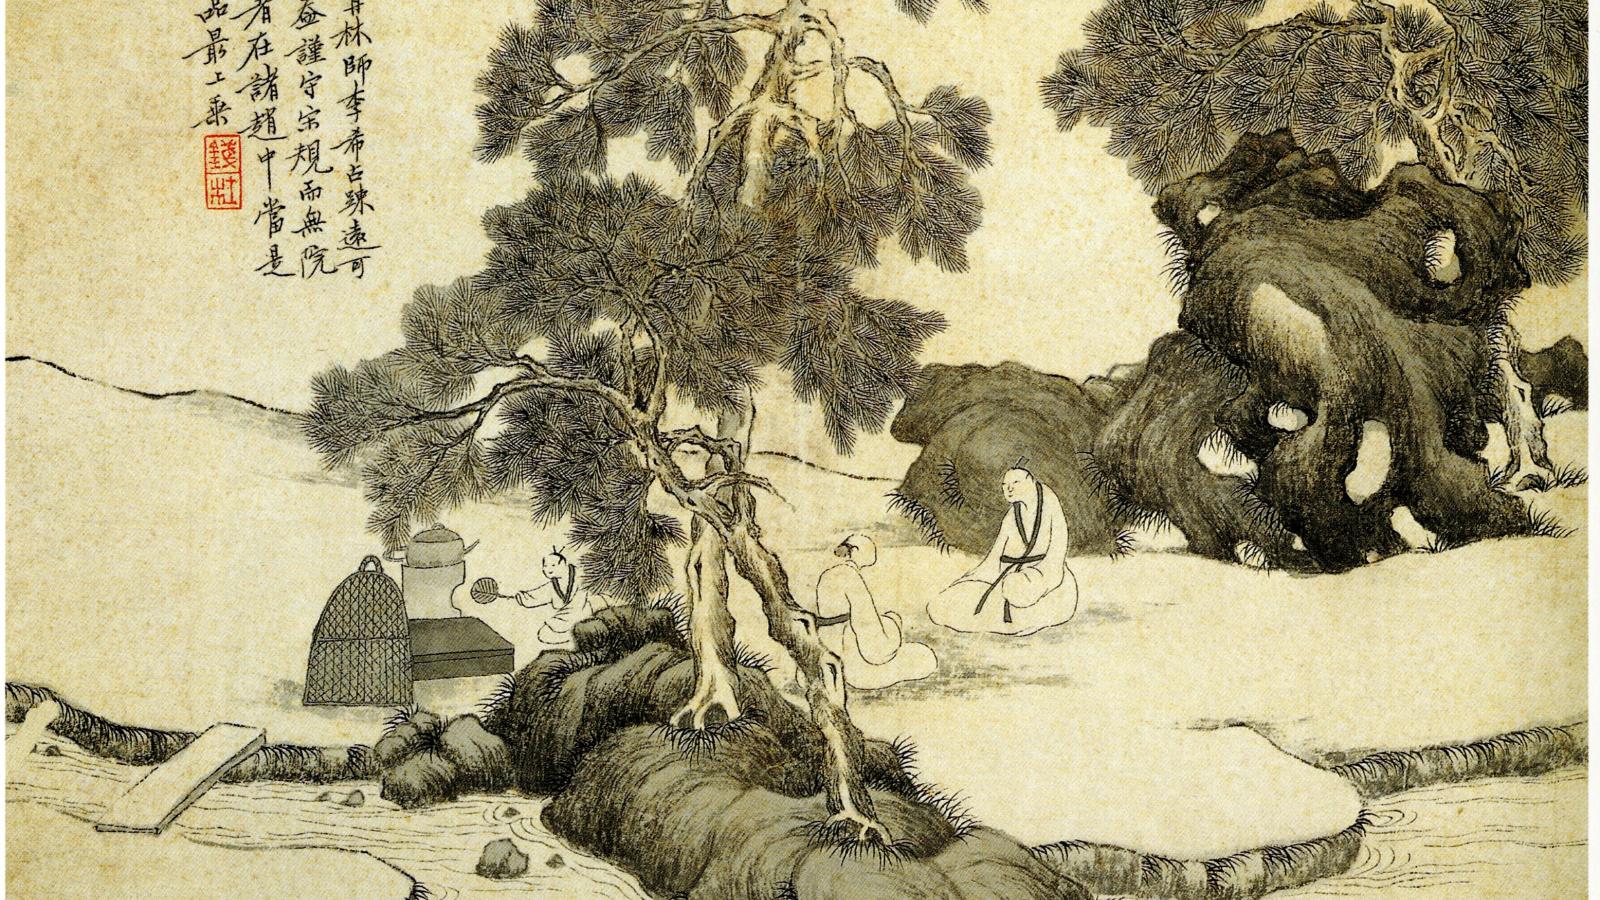 painting from 1790-1840 China